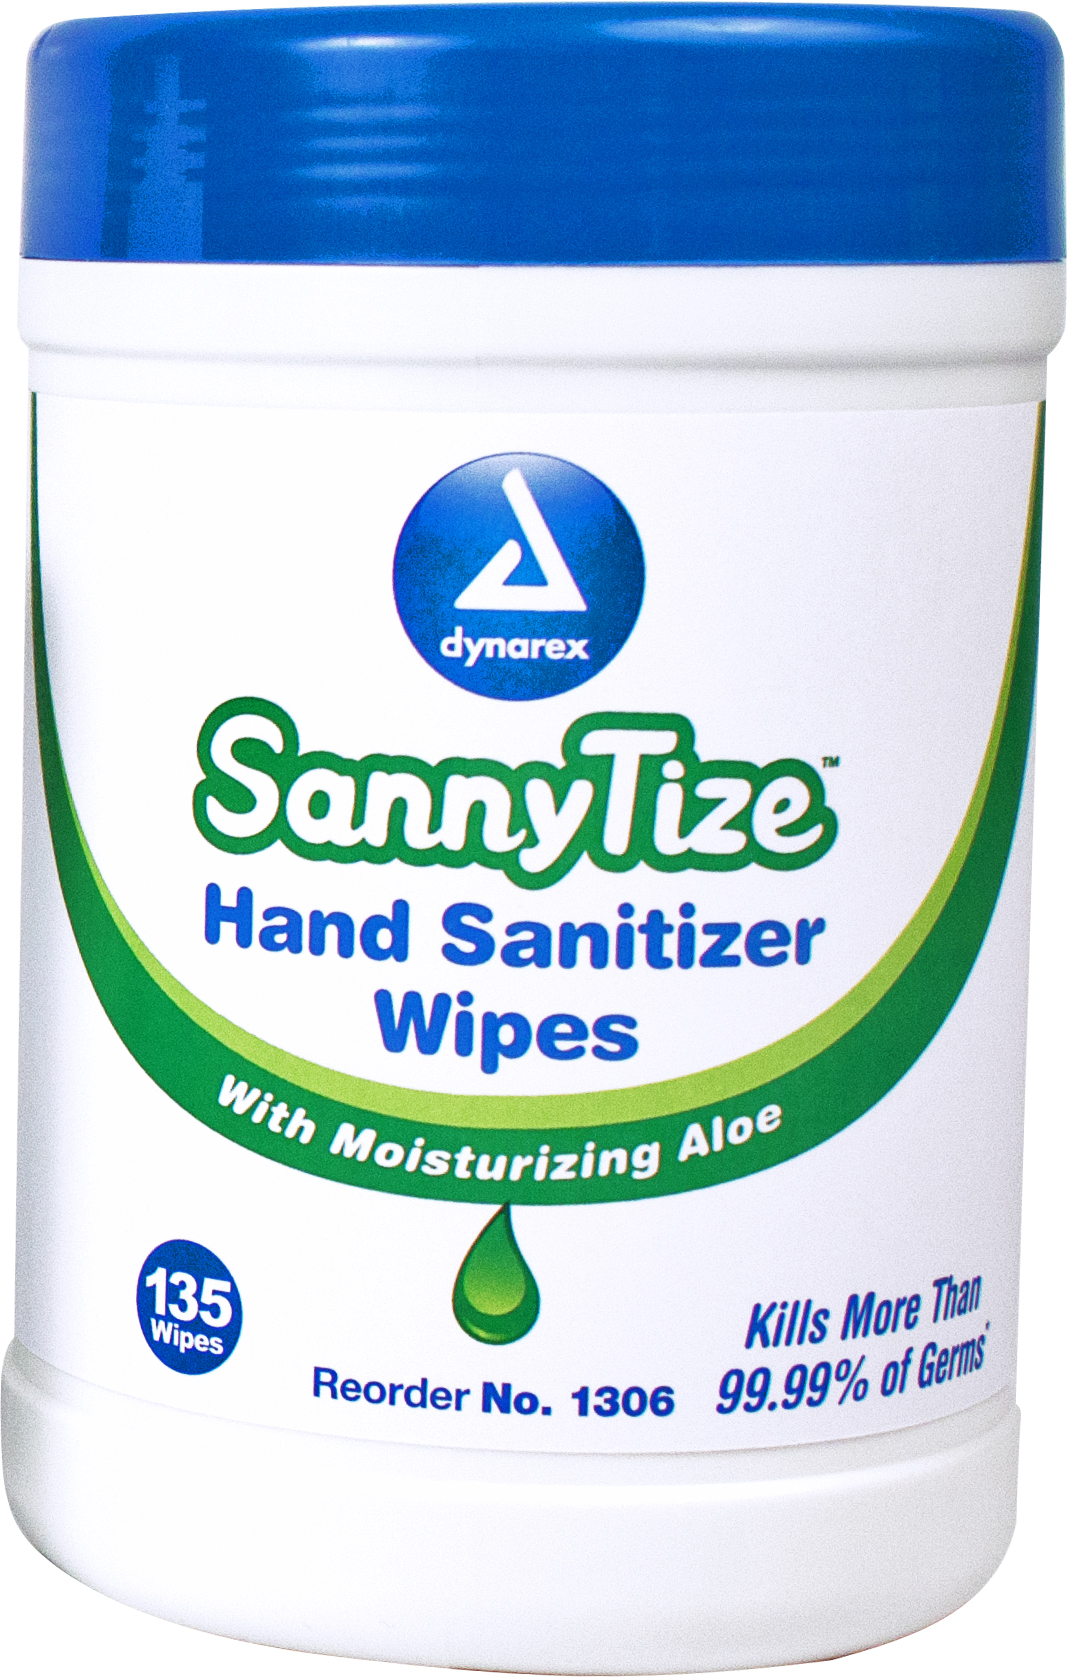 1306  Dynarex pop-up canister of Sannytize Instant Hand Sanitizer Wipers are saturated with 70% Ethyl Alcohol 